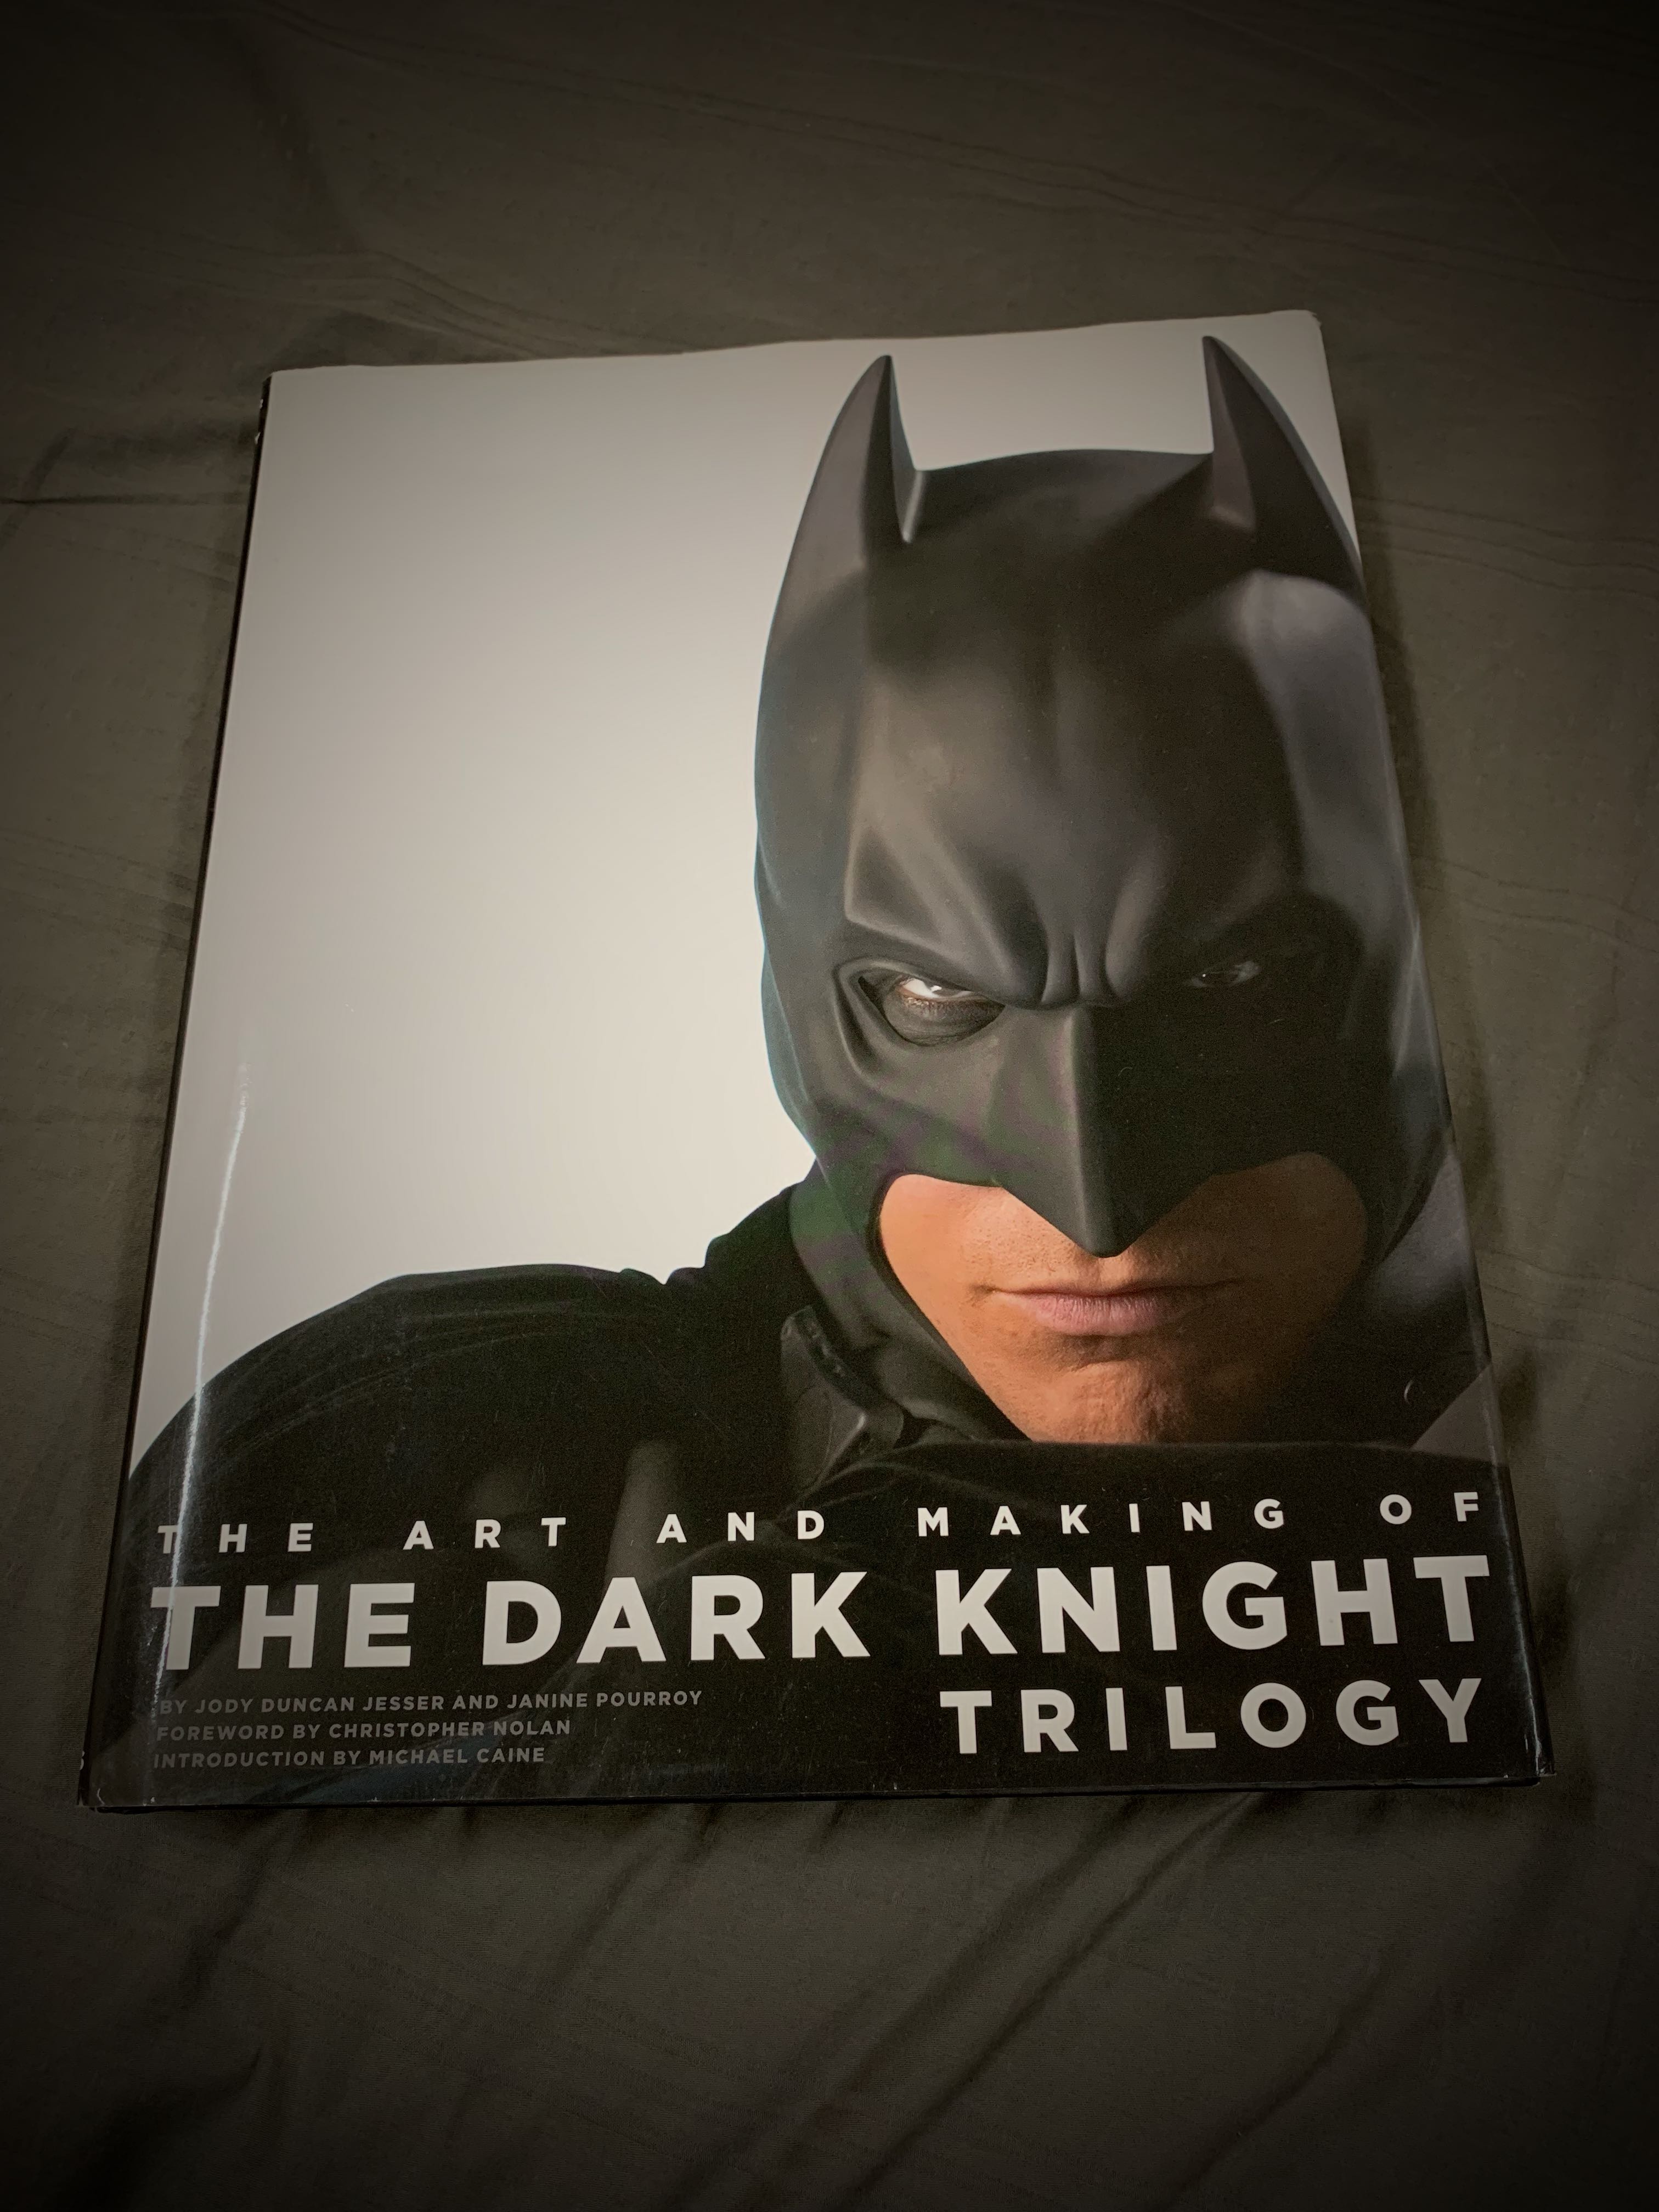 The Art and Making of the Dark Knight Trilogy eBook by Jody Duncan